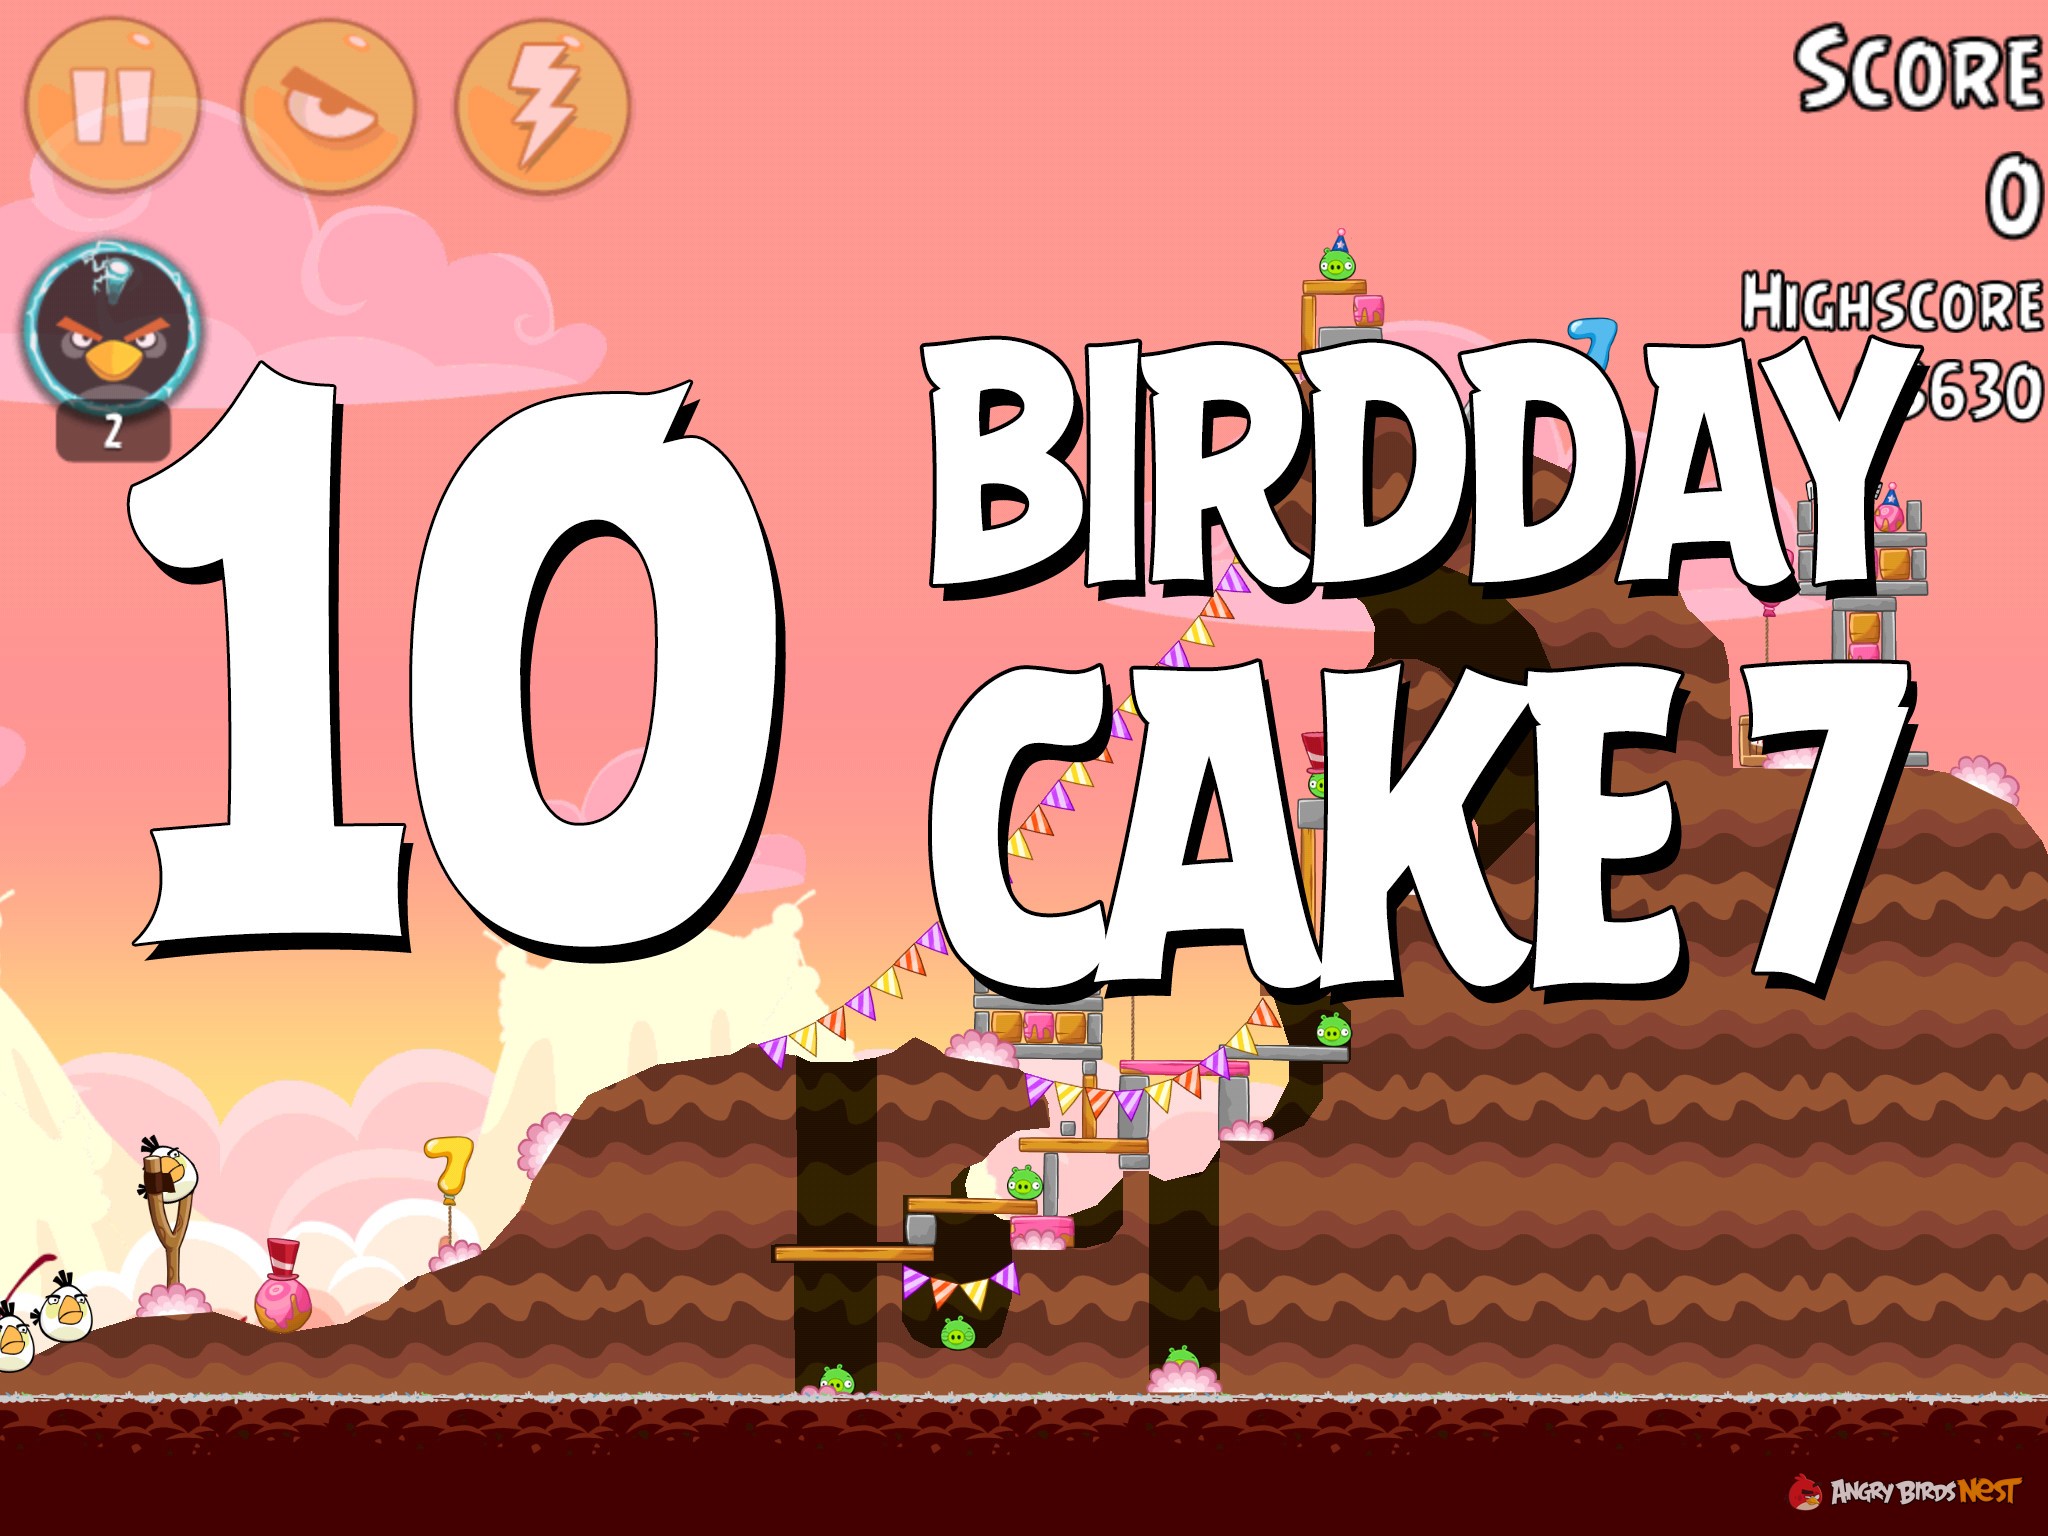 Angry-Birds-Birdday-Party-Cake-7-Level-10